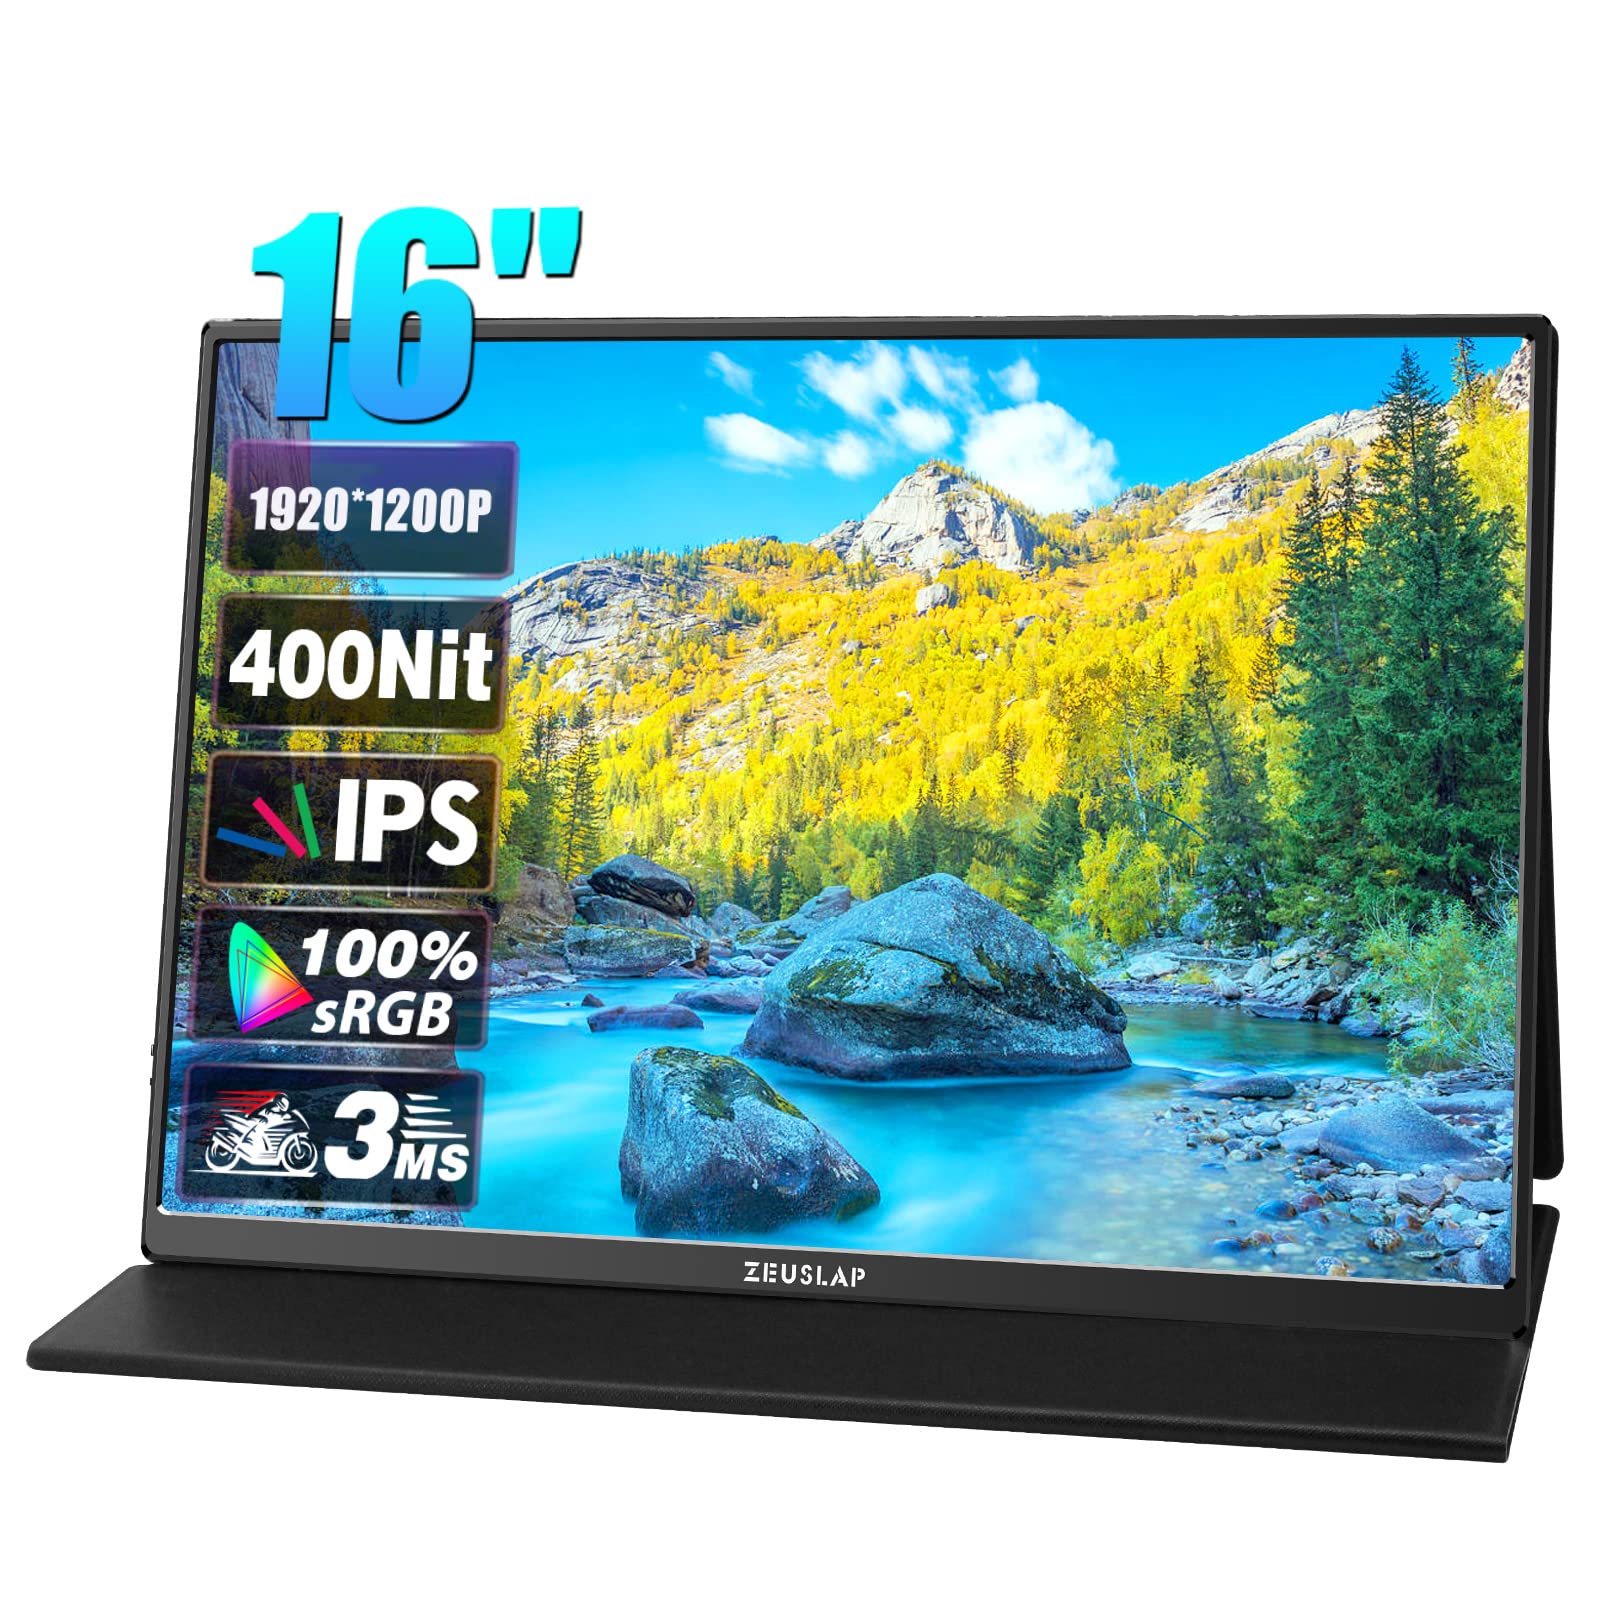 ZEUSLAP P16 16 Inch Portable Monitor, 1920 * 1200 60Hz 100% sRGB IPS Screen Computer Gaming Monitor for Laptop, Phone, Switch, Xbox, PS4/5 etc.